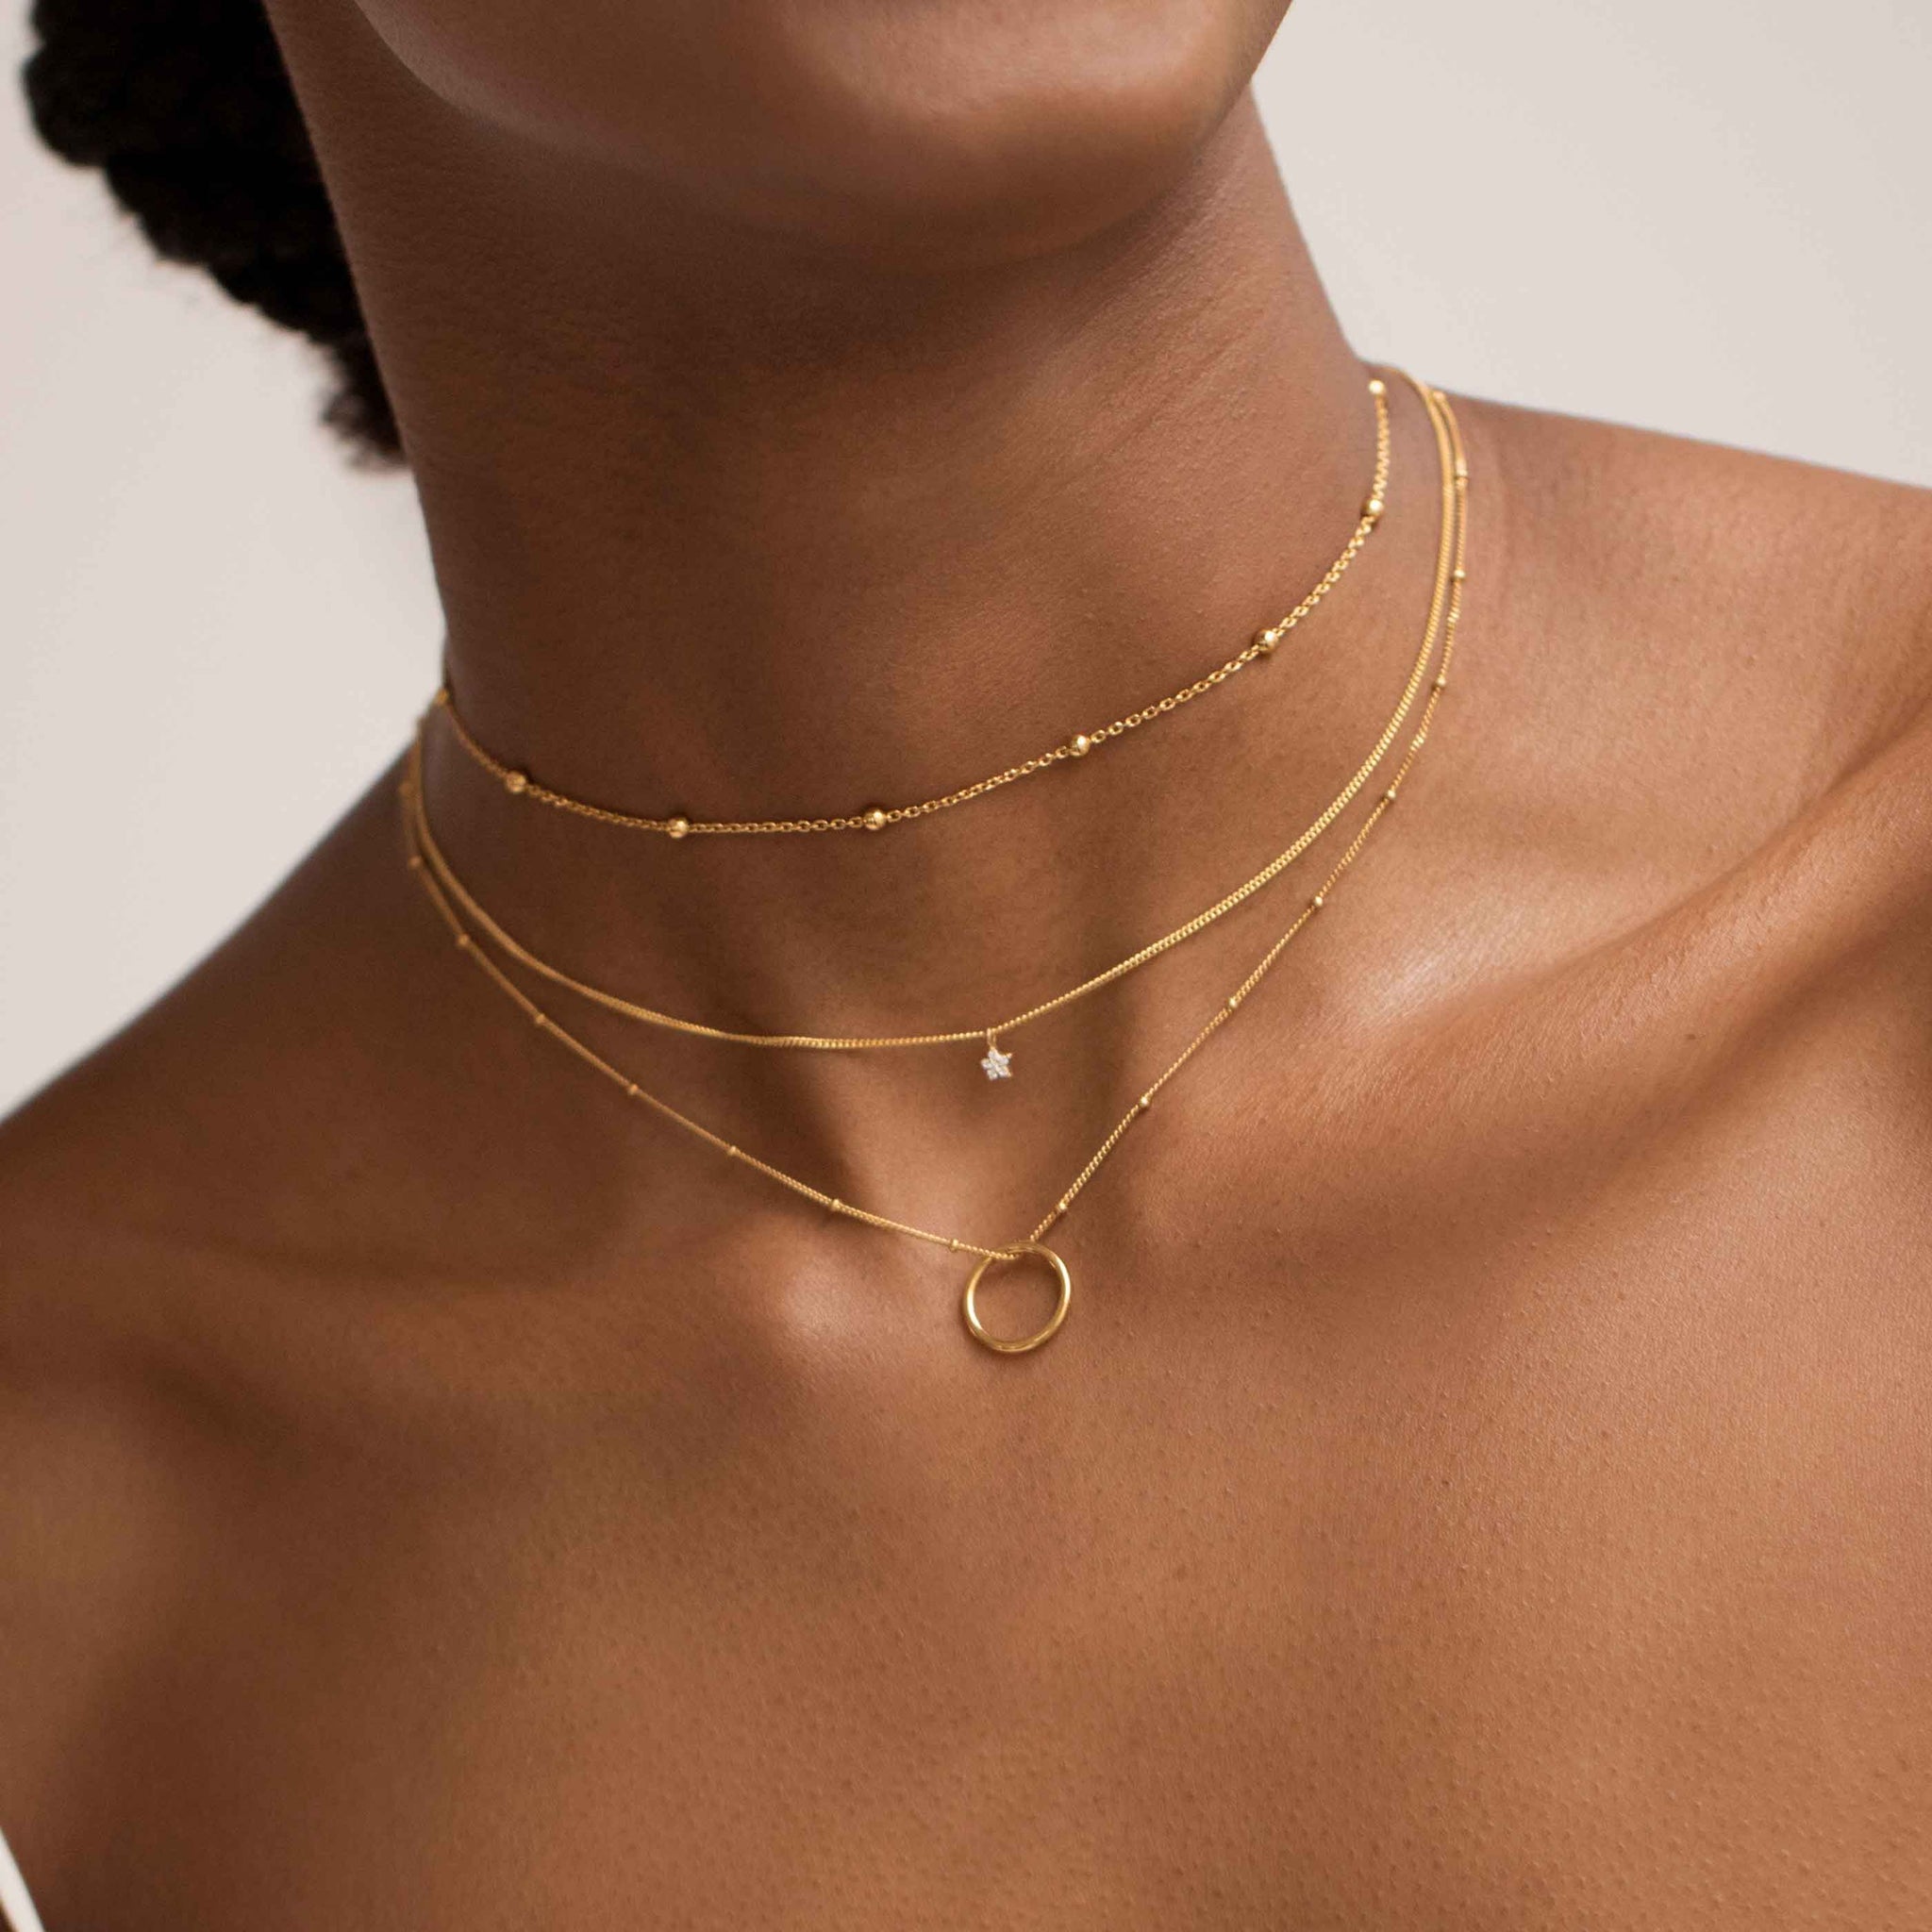 Basic Halo Pendant Necklace in Gold worn with gold necklaces